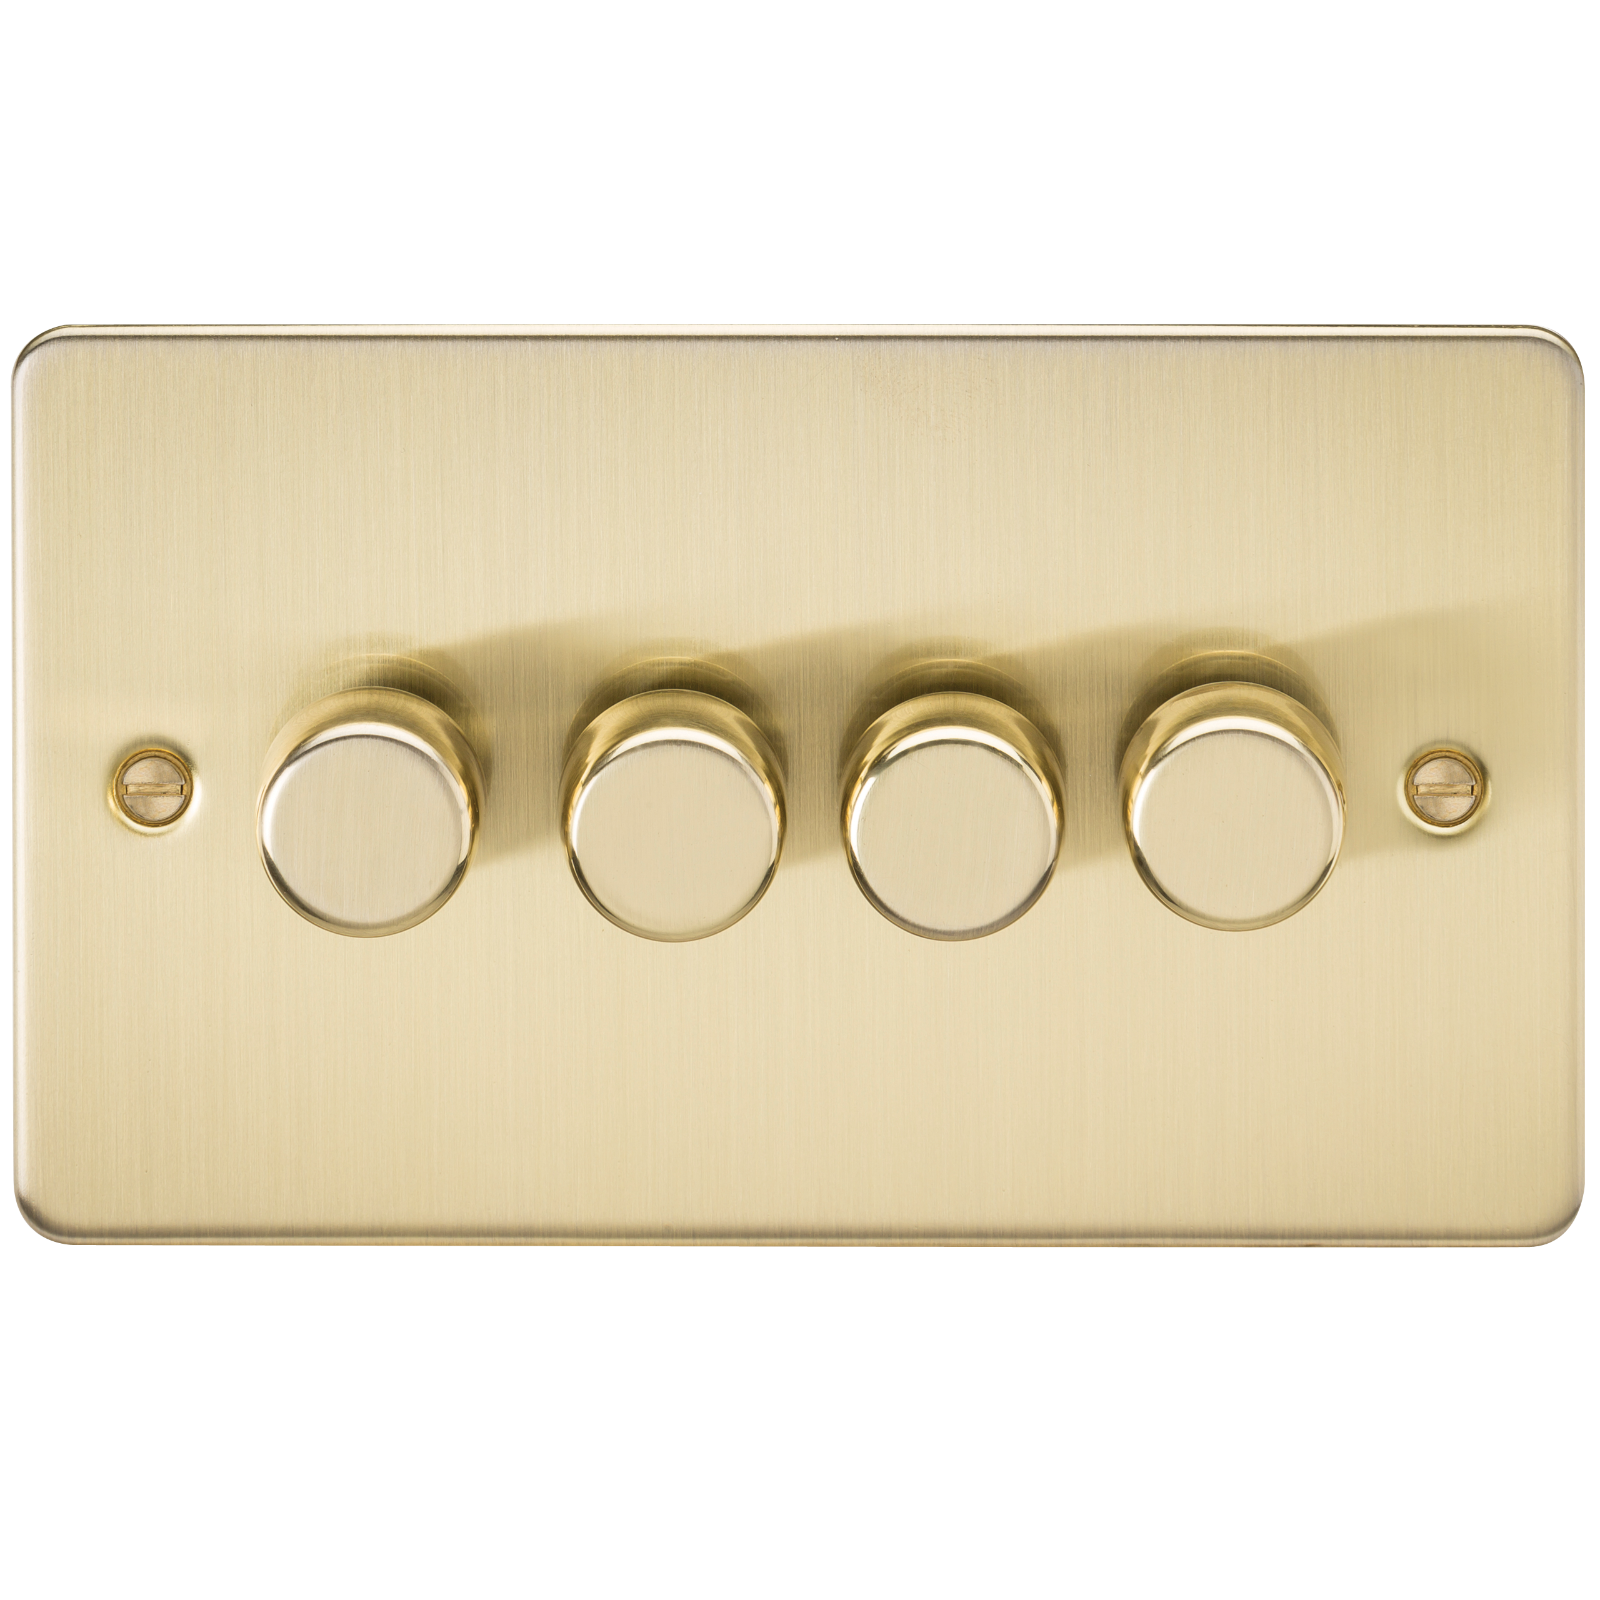 Flat Plate 4G 2 Way Dimmer 60-400W - Brushed Brass - FP2164BB 